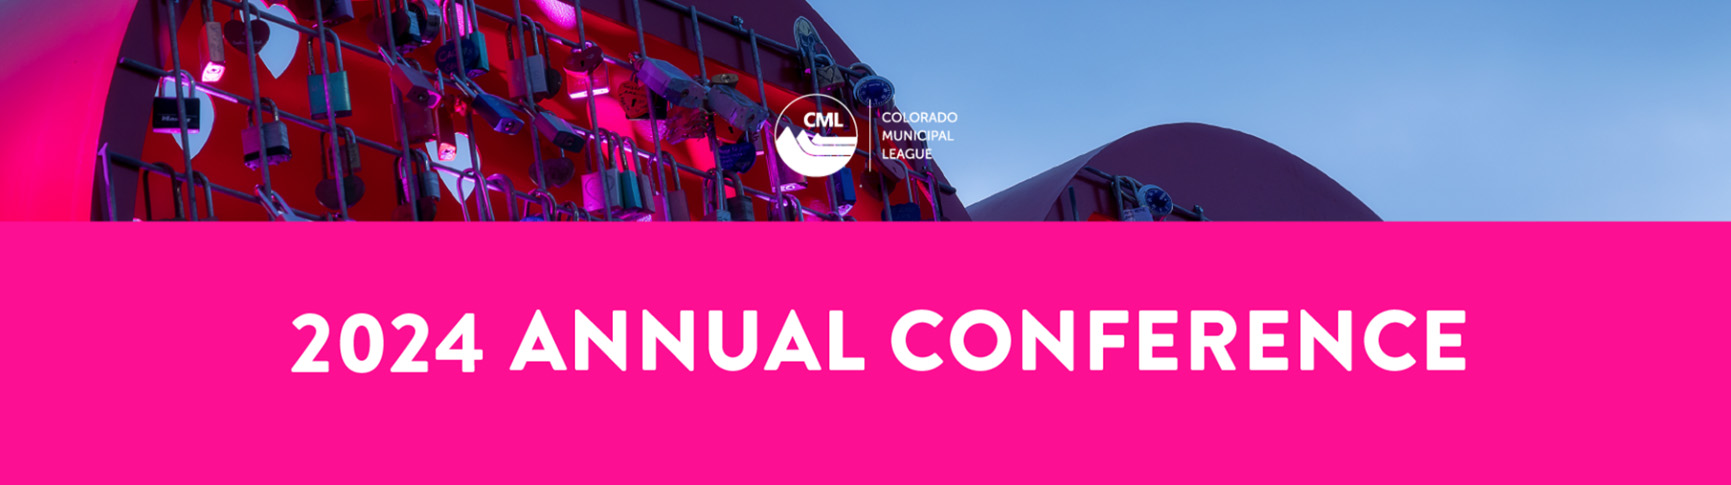 CML Annual Conference